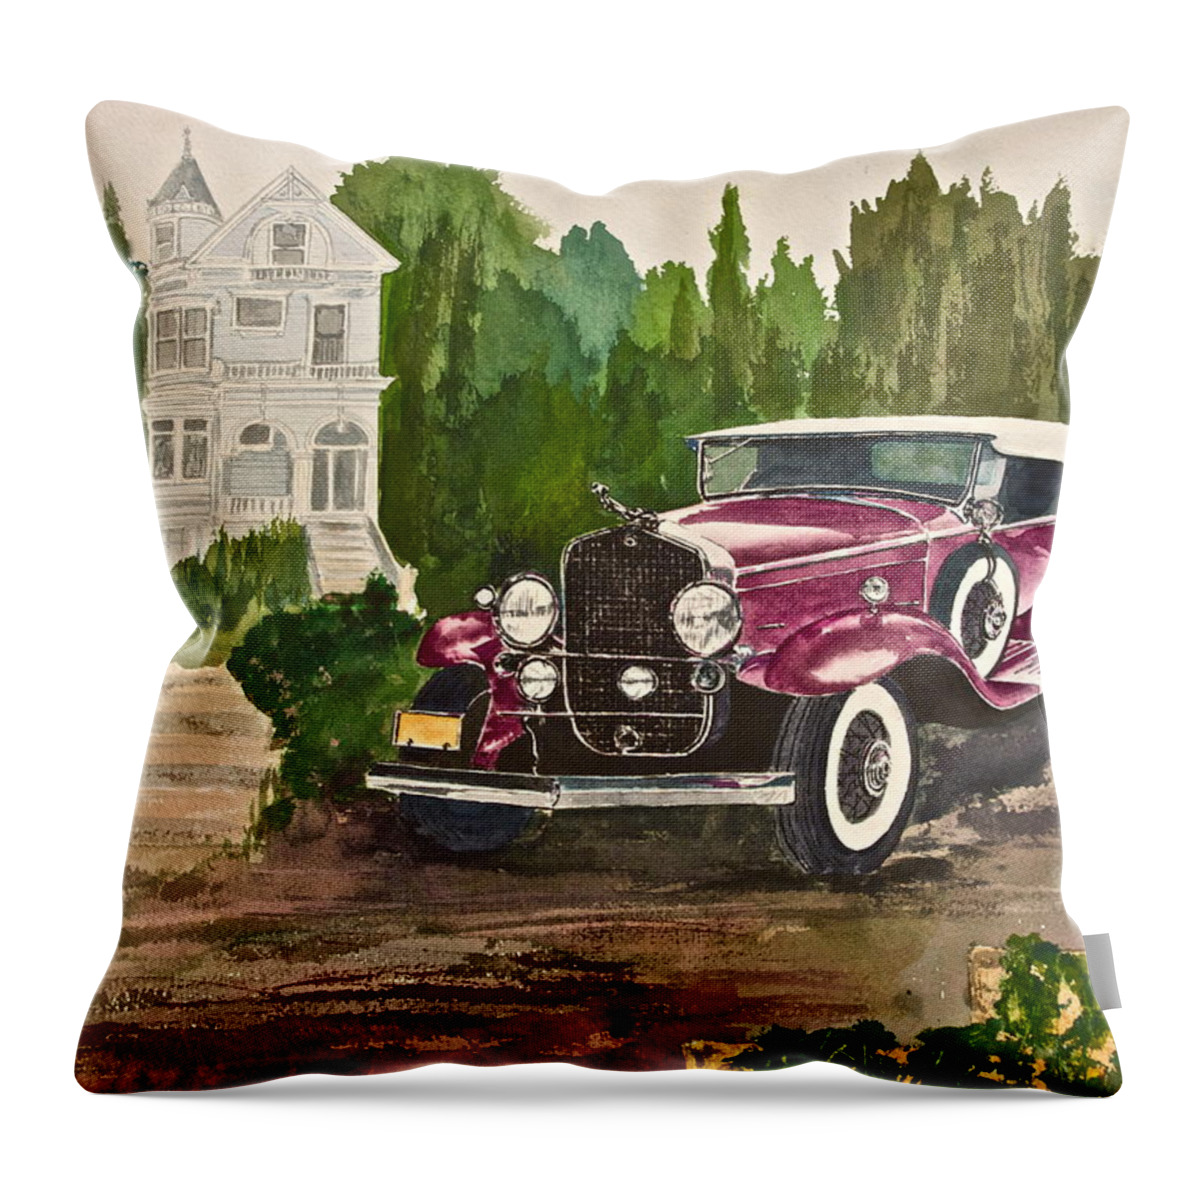 1930 Throw Pillow featuring the painting 1930 Cadillac II by Frank SantAgata